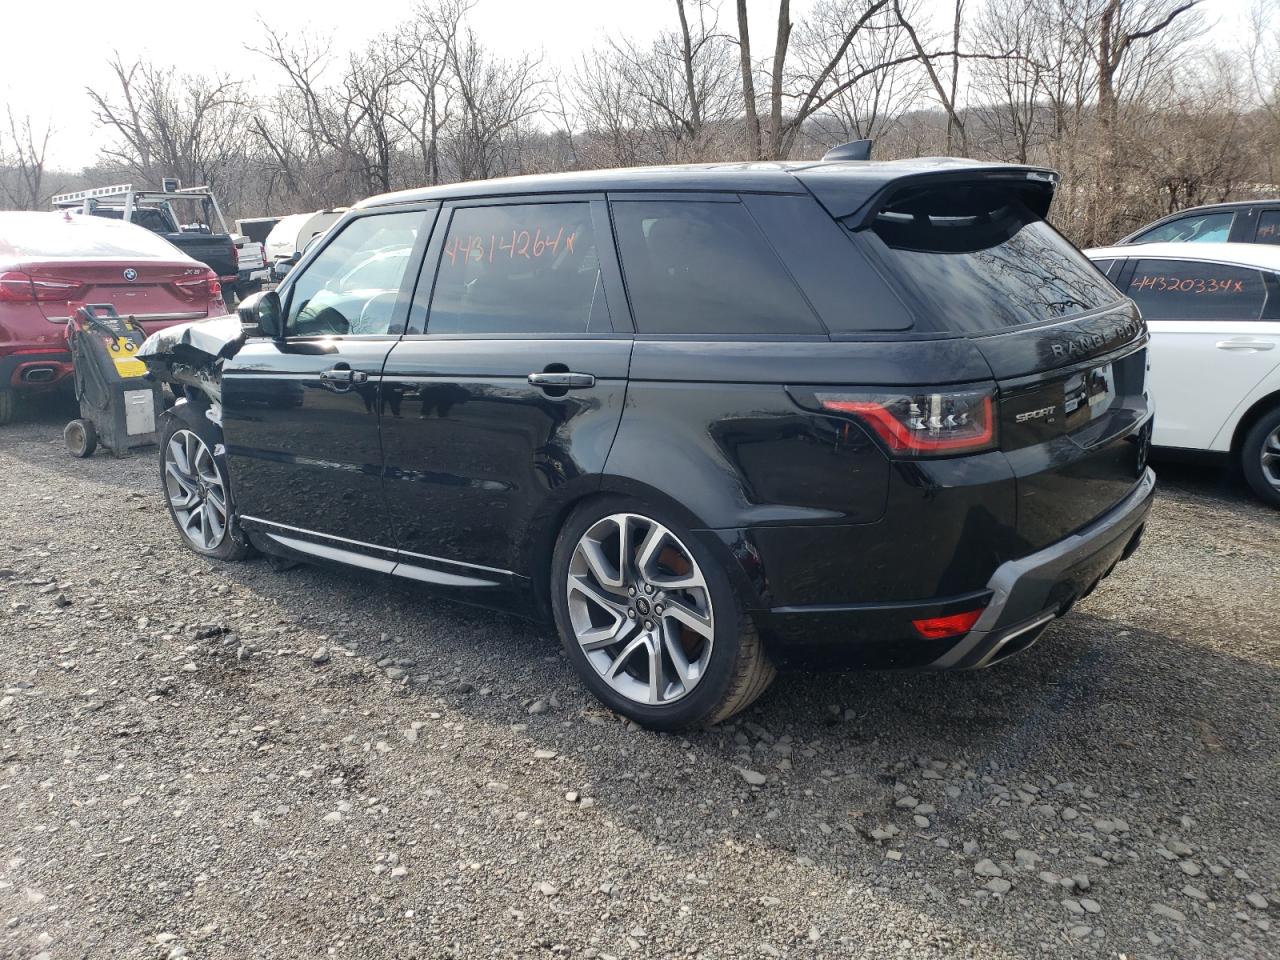 Salvage 2021 Land Rover Range Rover Sport Hse Silver Edition